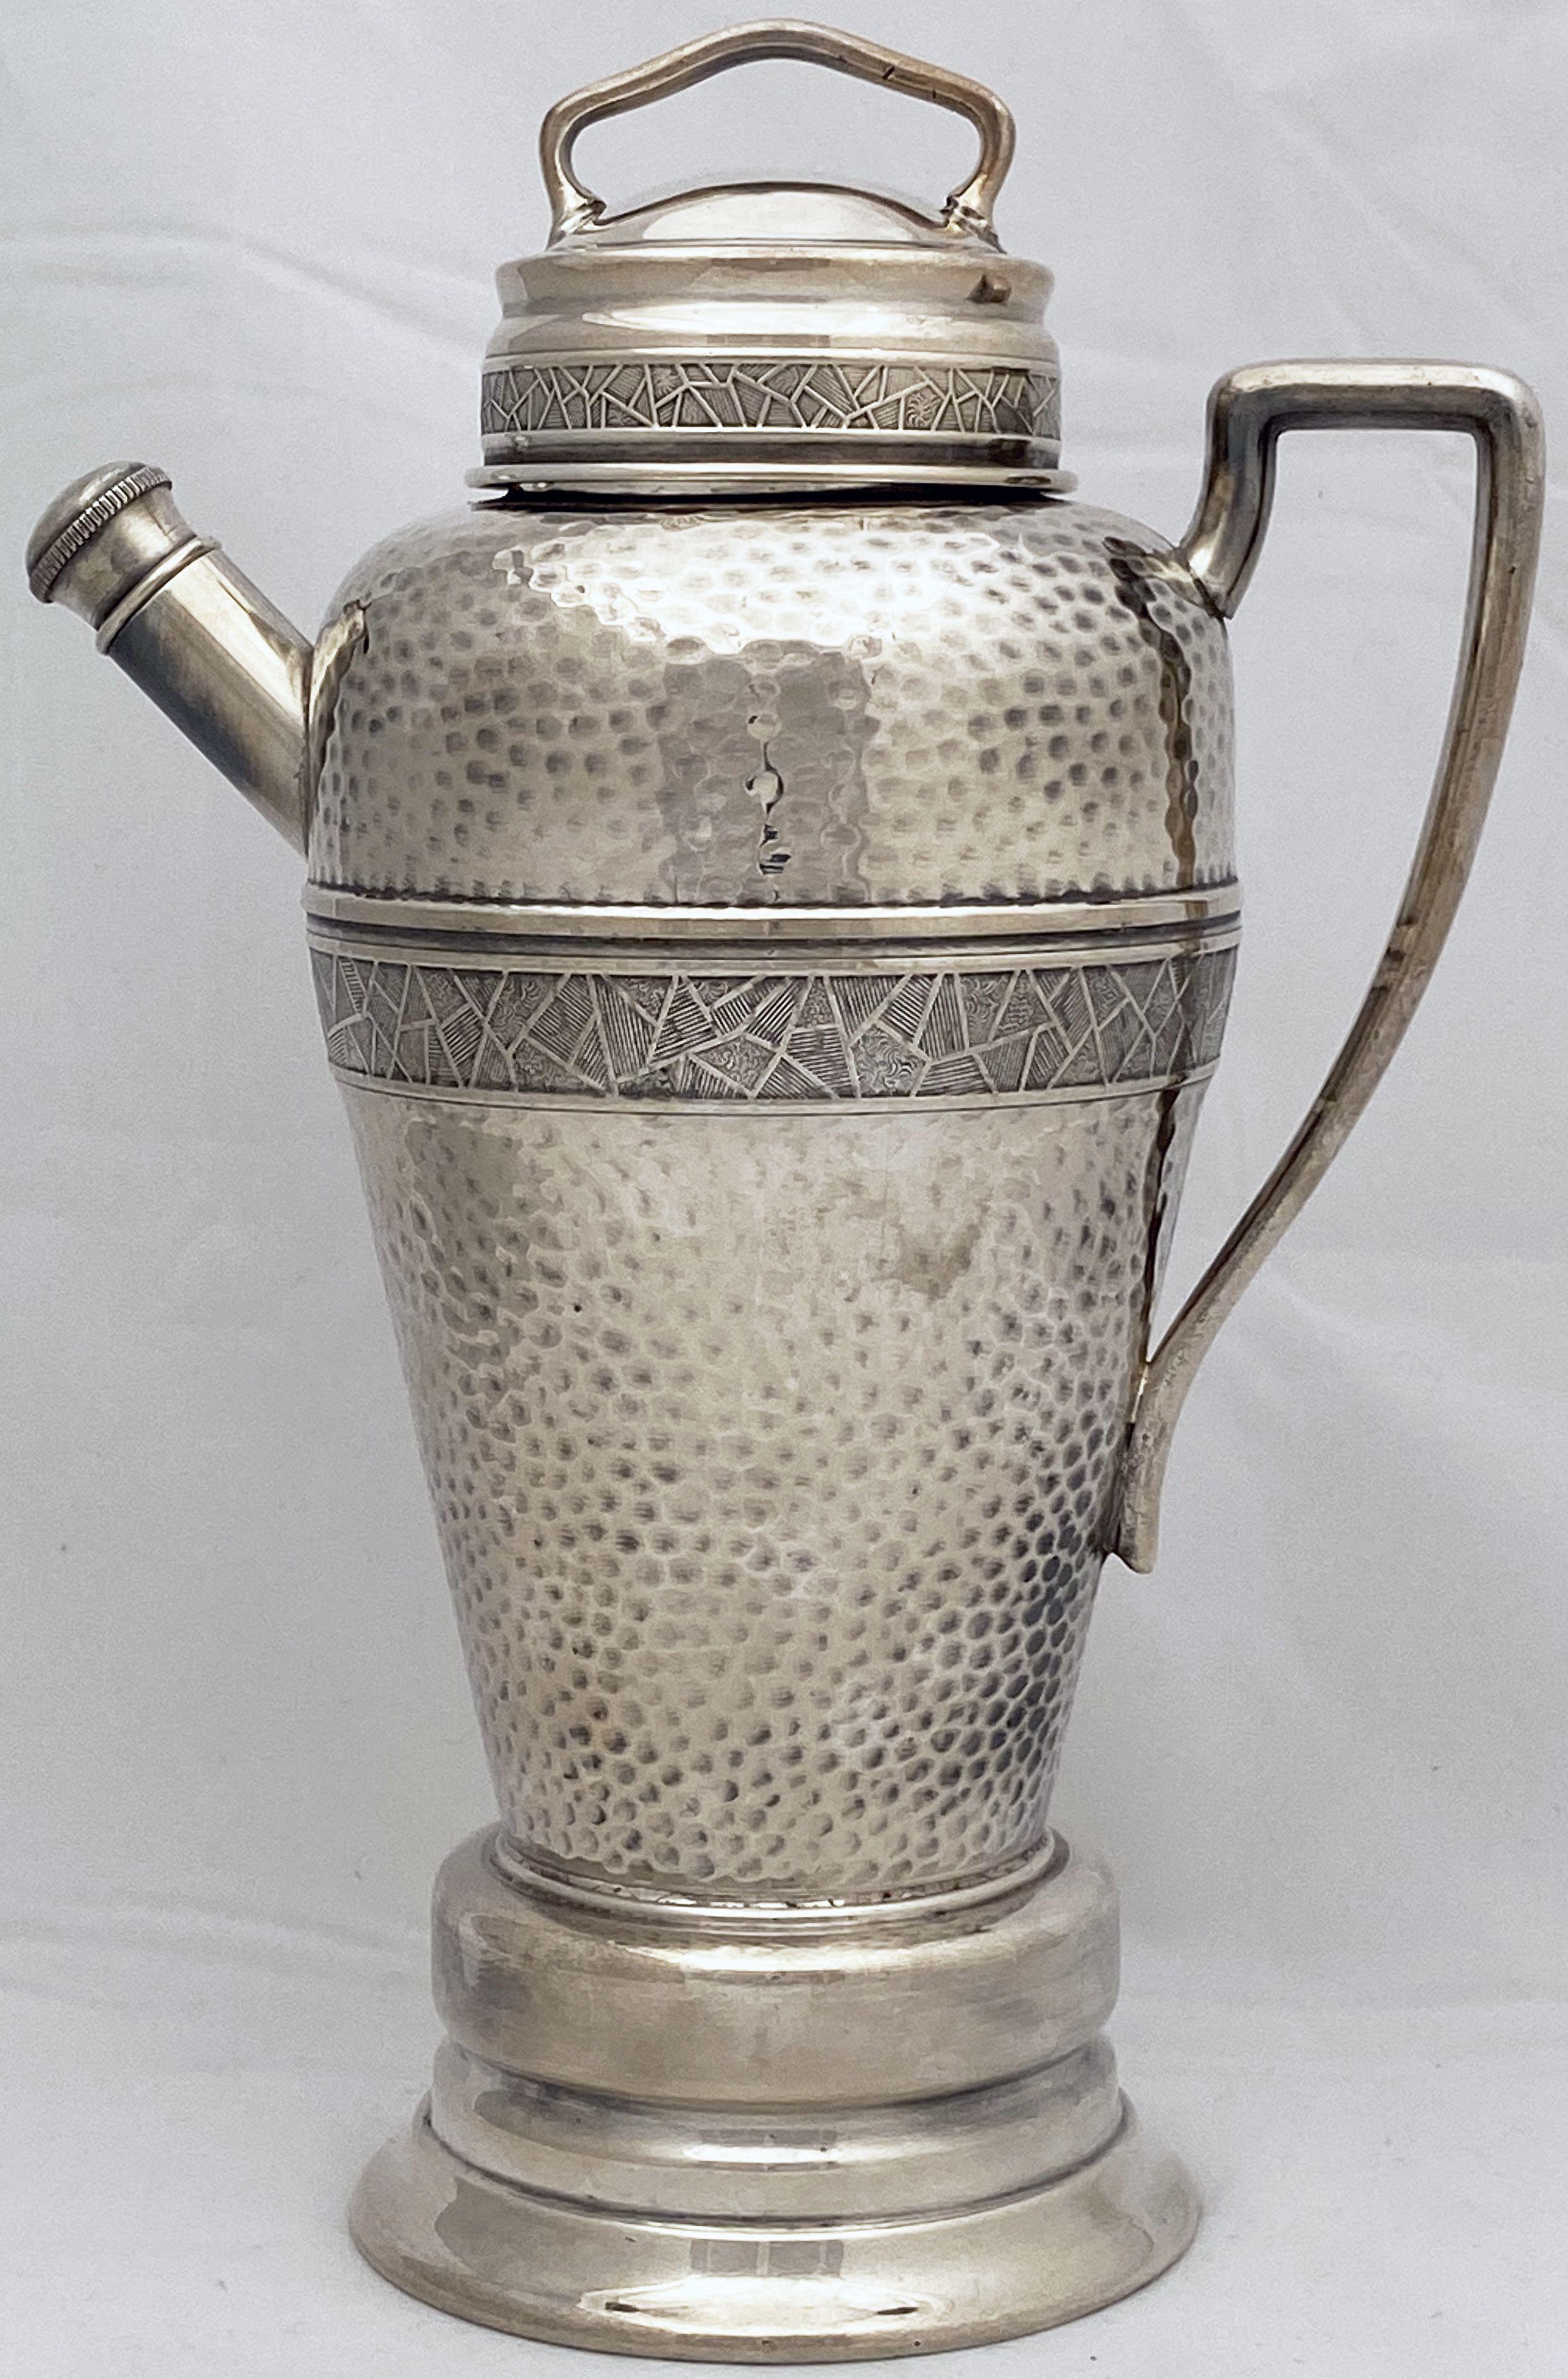 A large English martini or cocktail shaker of fine plate silver from the Art Deco era with a music box under the base, featuring a hammered body of tapering form, removable top and pour spout with screw-down cap, angular handle, and decorative